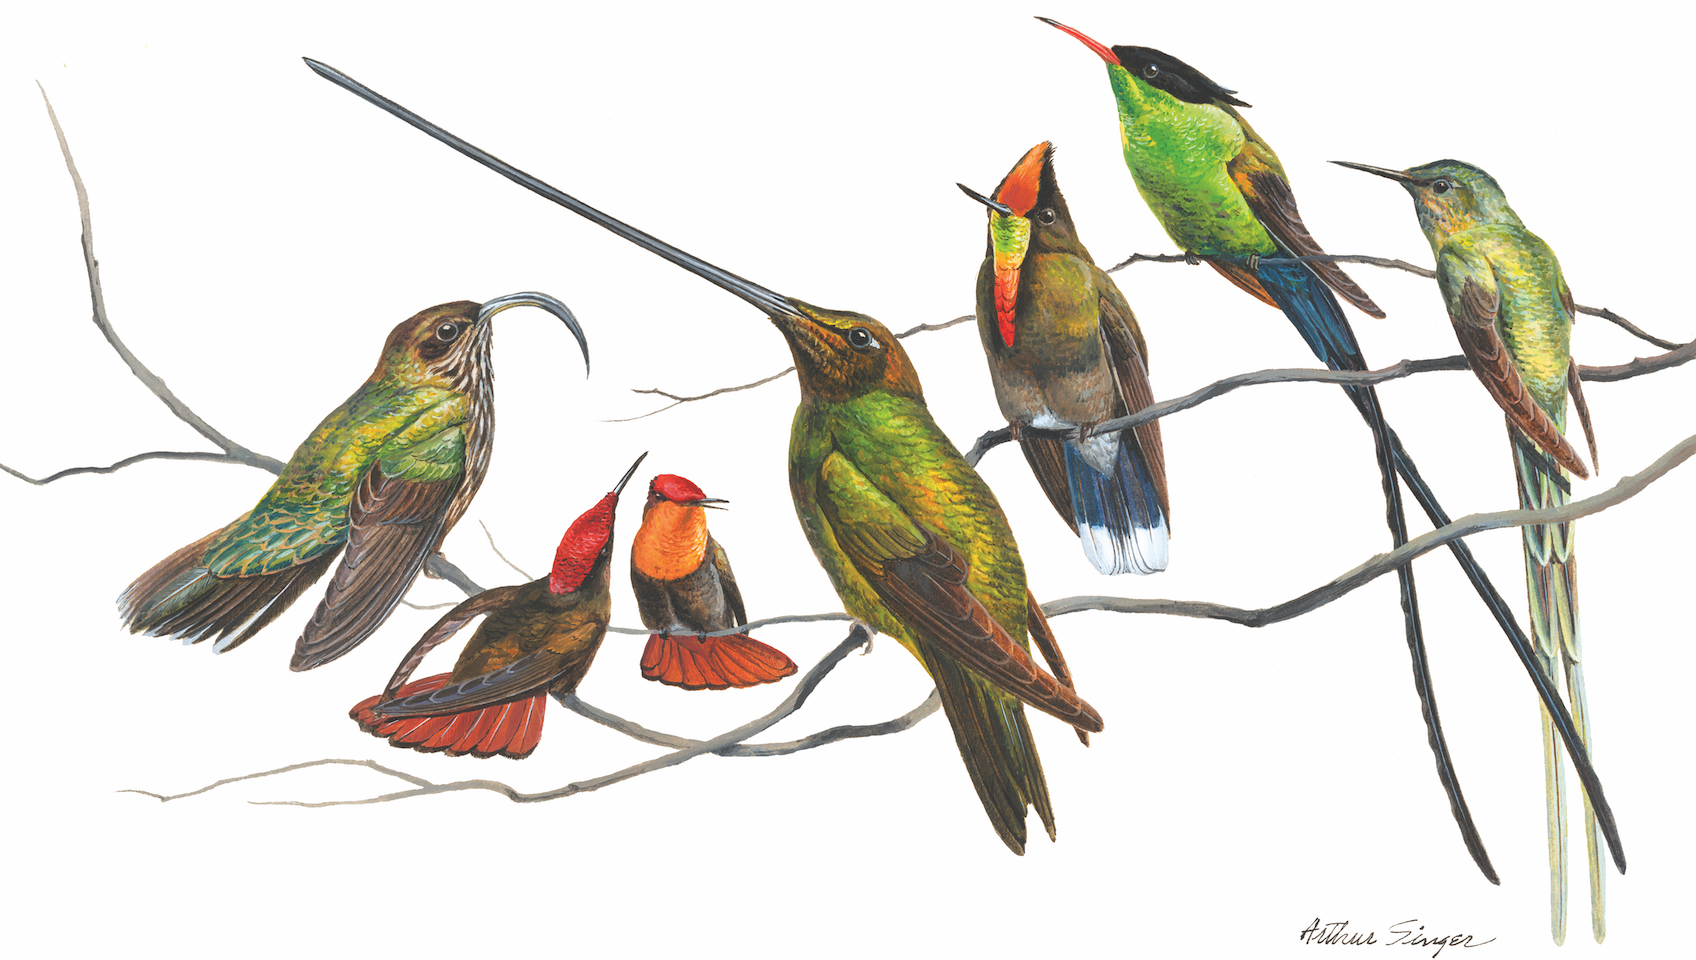 Realistic pen and ink illustration of seven colorful hummingbirds lined up on a branch